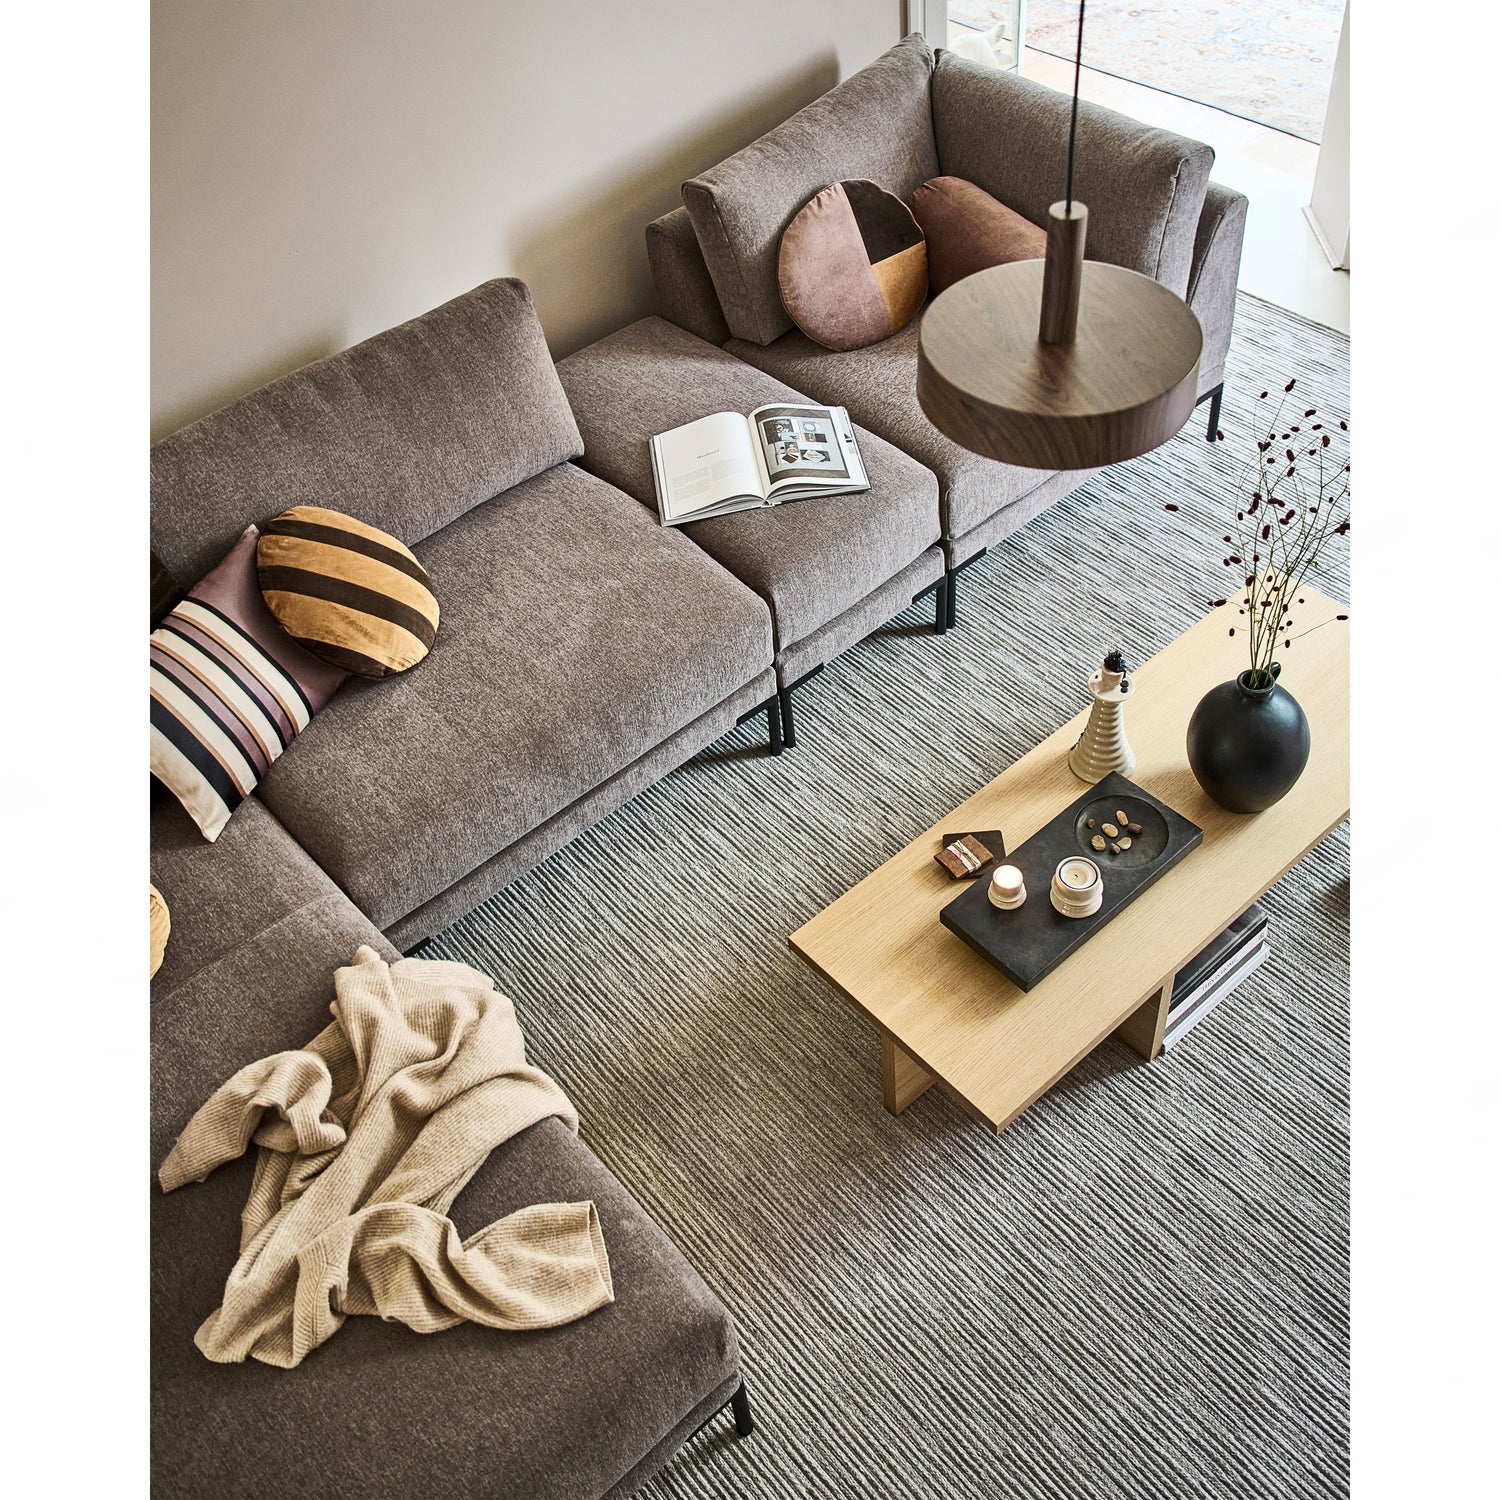 400484-400486-400489-400487-T-01_VT_SF_Couple_element_hoek_poef_lounge_loveseat_taupe.jpg?auto=webp&format=png&width=1500&height=1500